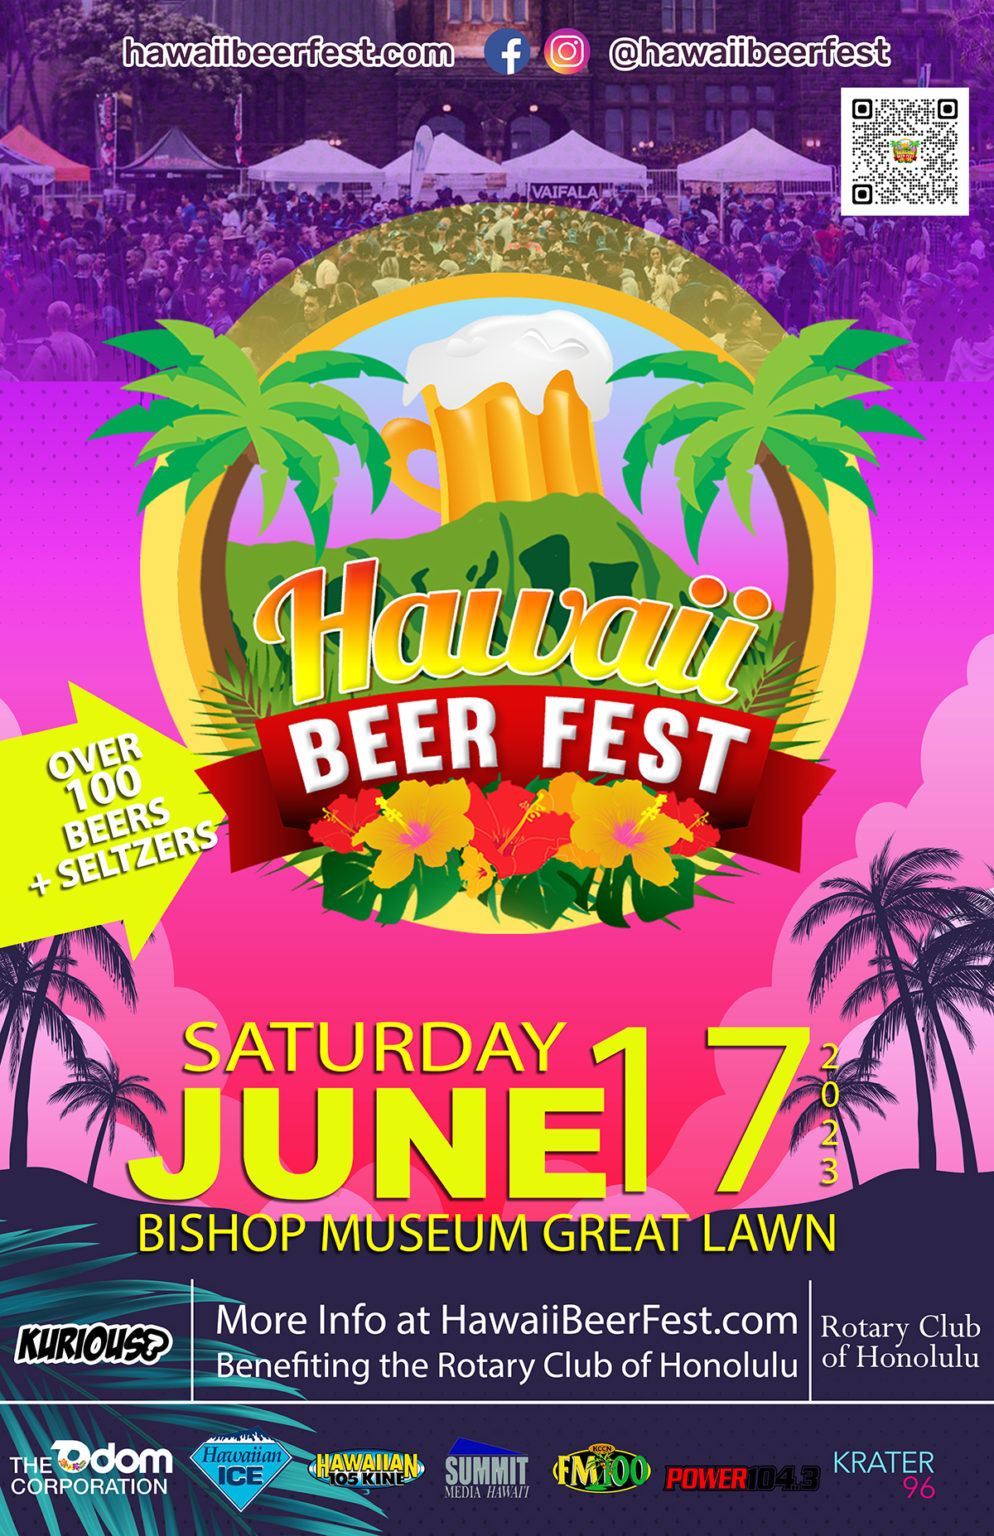 About Hawaii Beer Fest